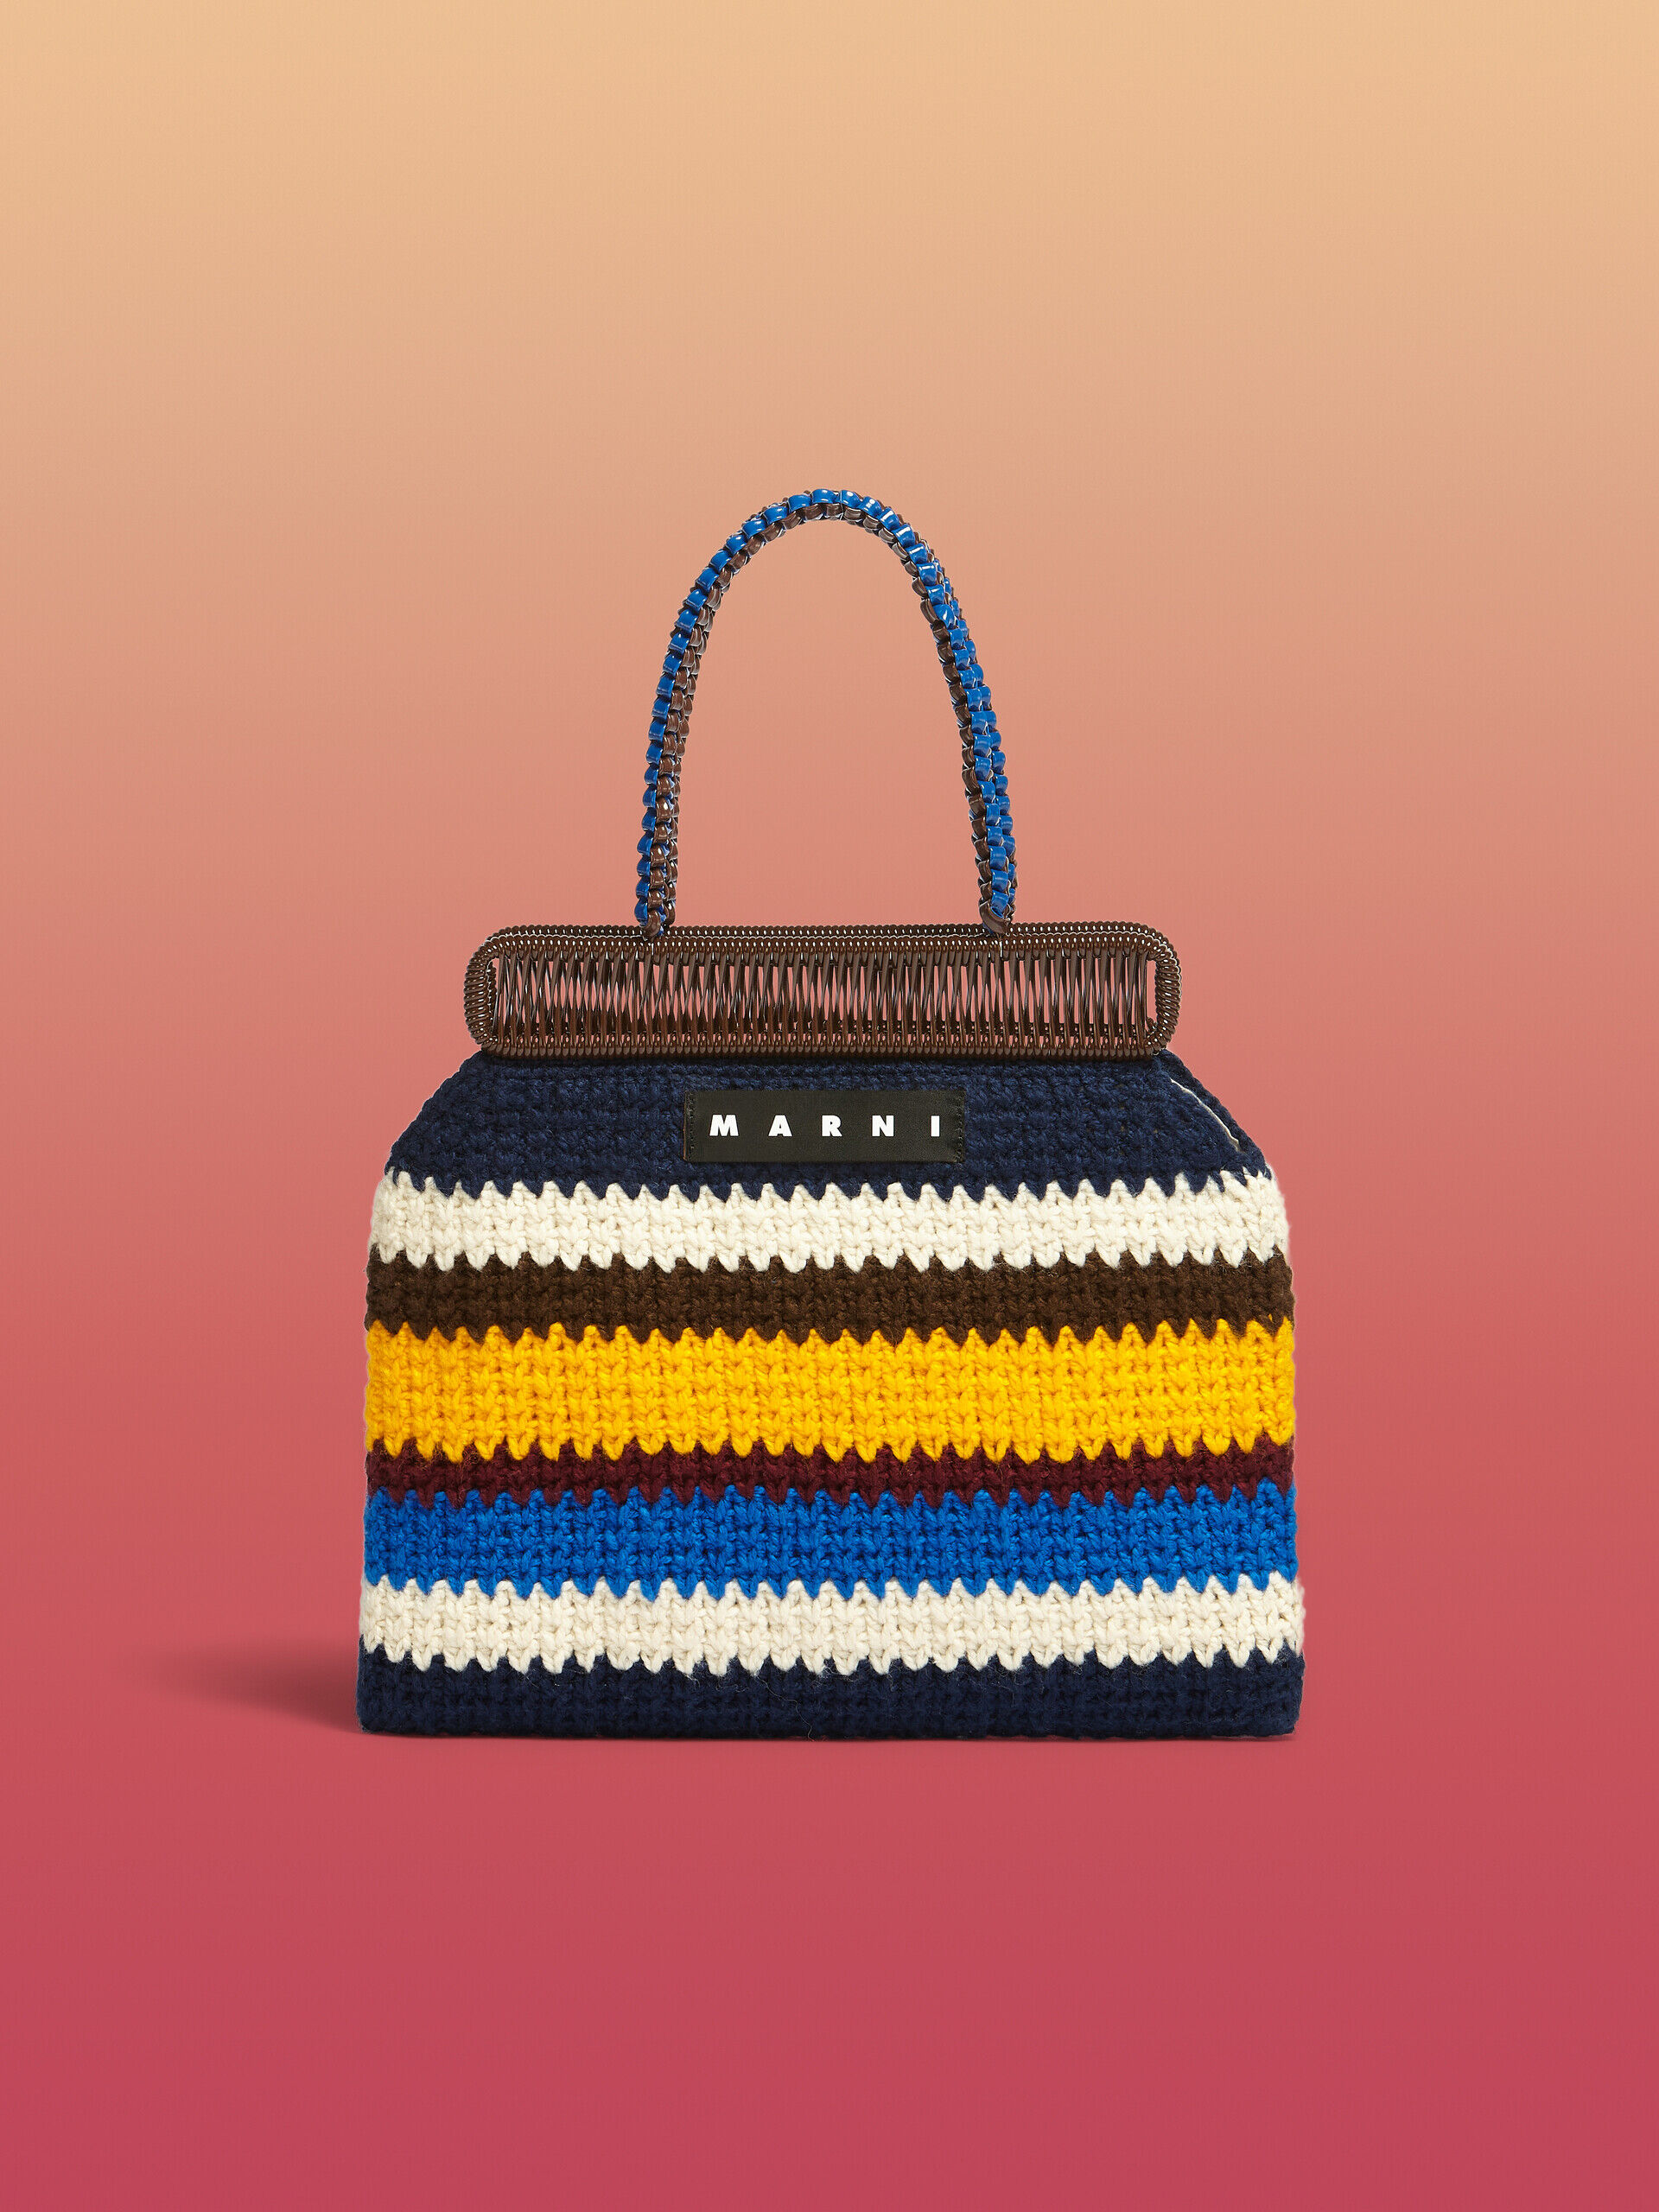 View all products | Marni